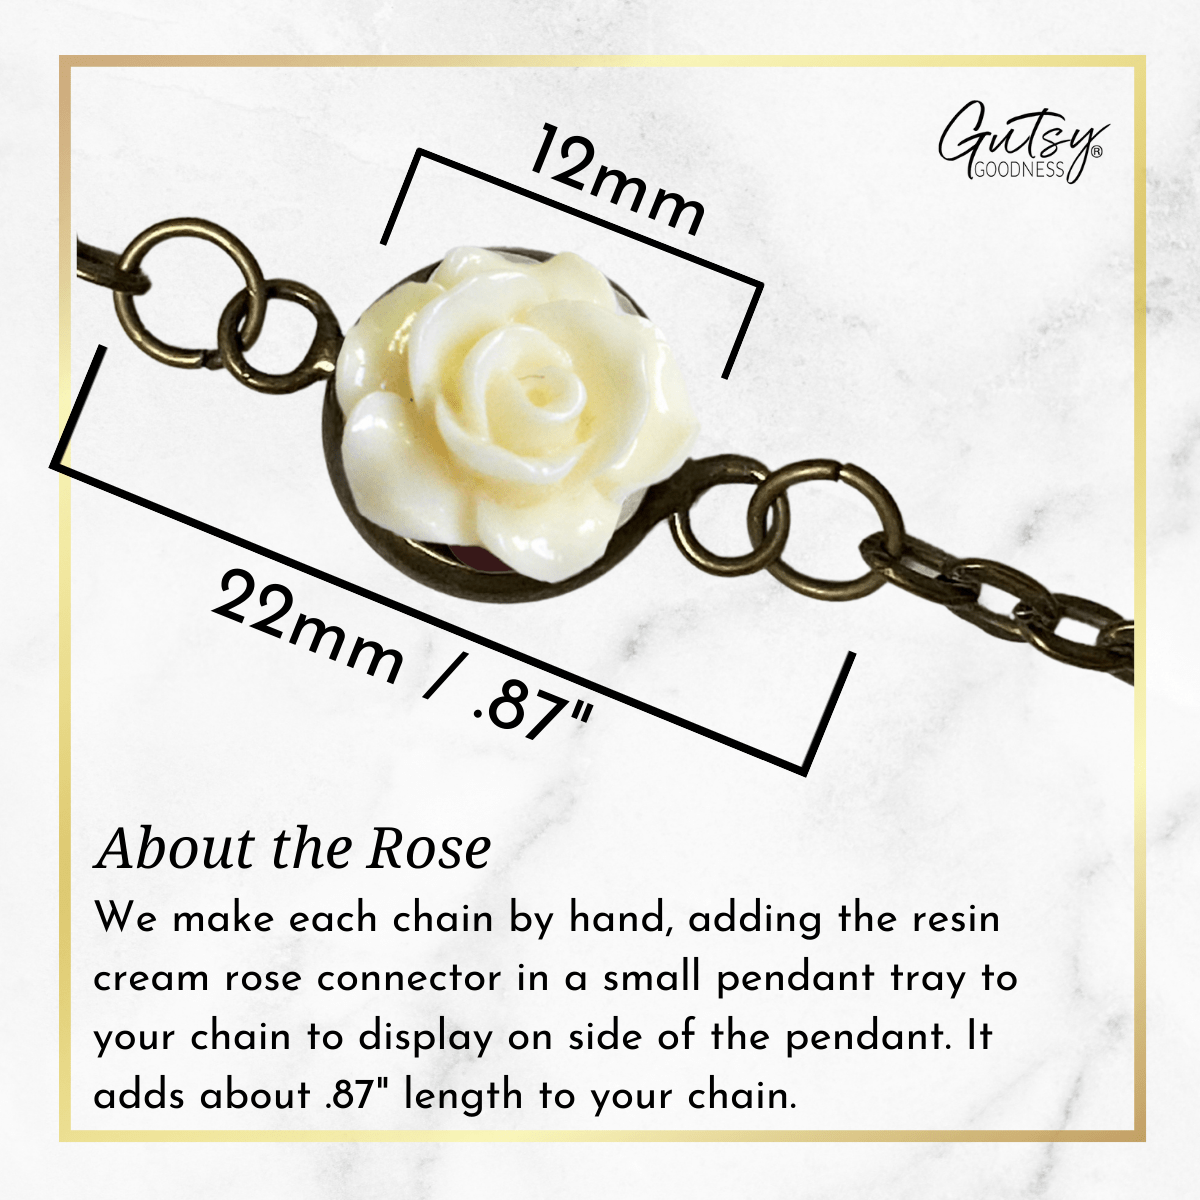 Decorative Rose Connector Chain - Add a touch of vintage chic - Gutsy Goodness